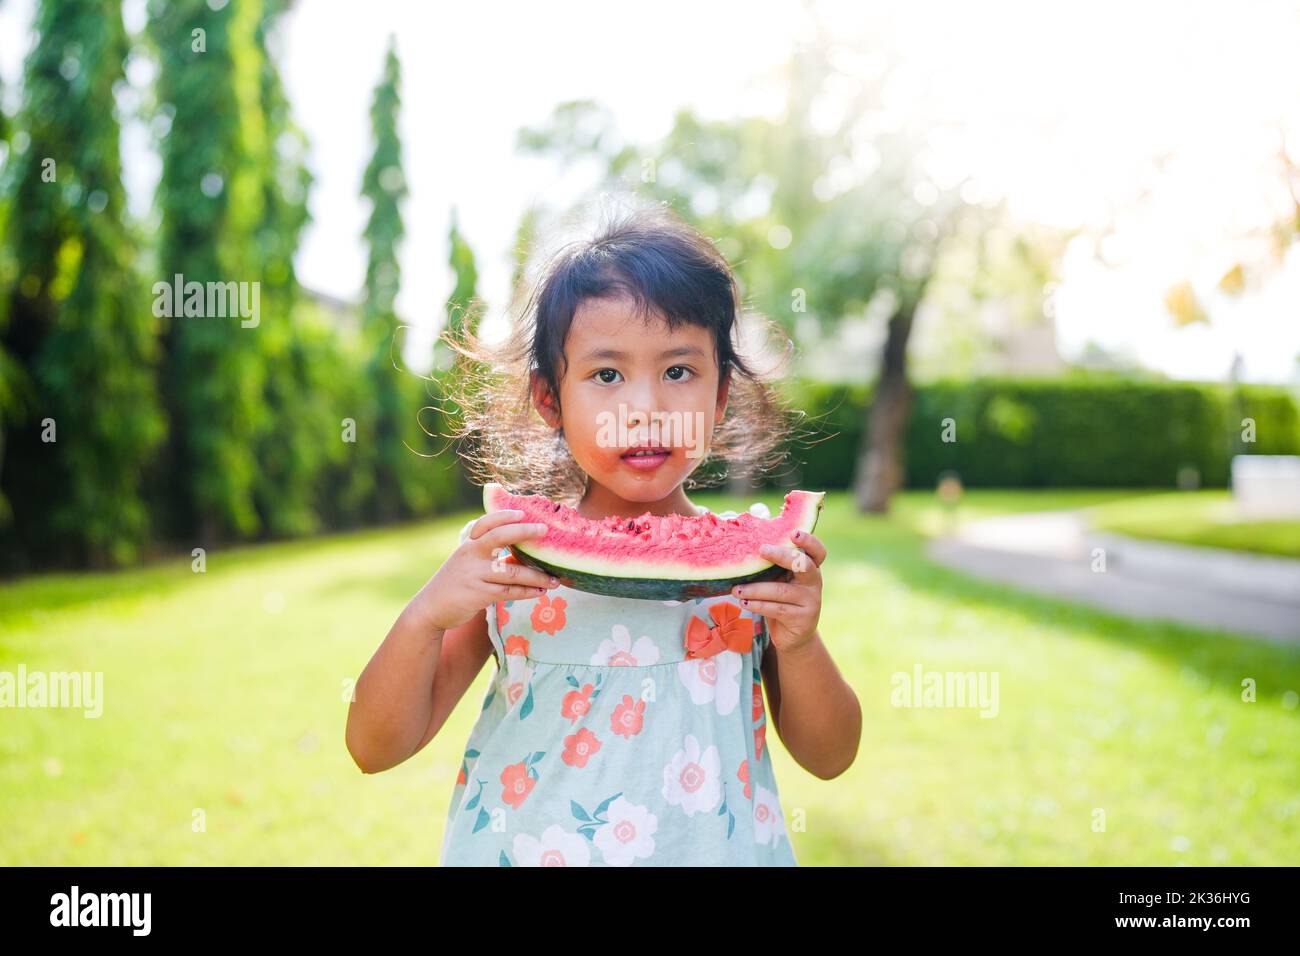 A cute little Southeast Asian girl eating a watermelon in a park Stock Photo